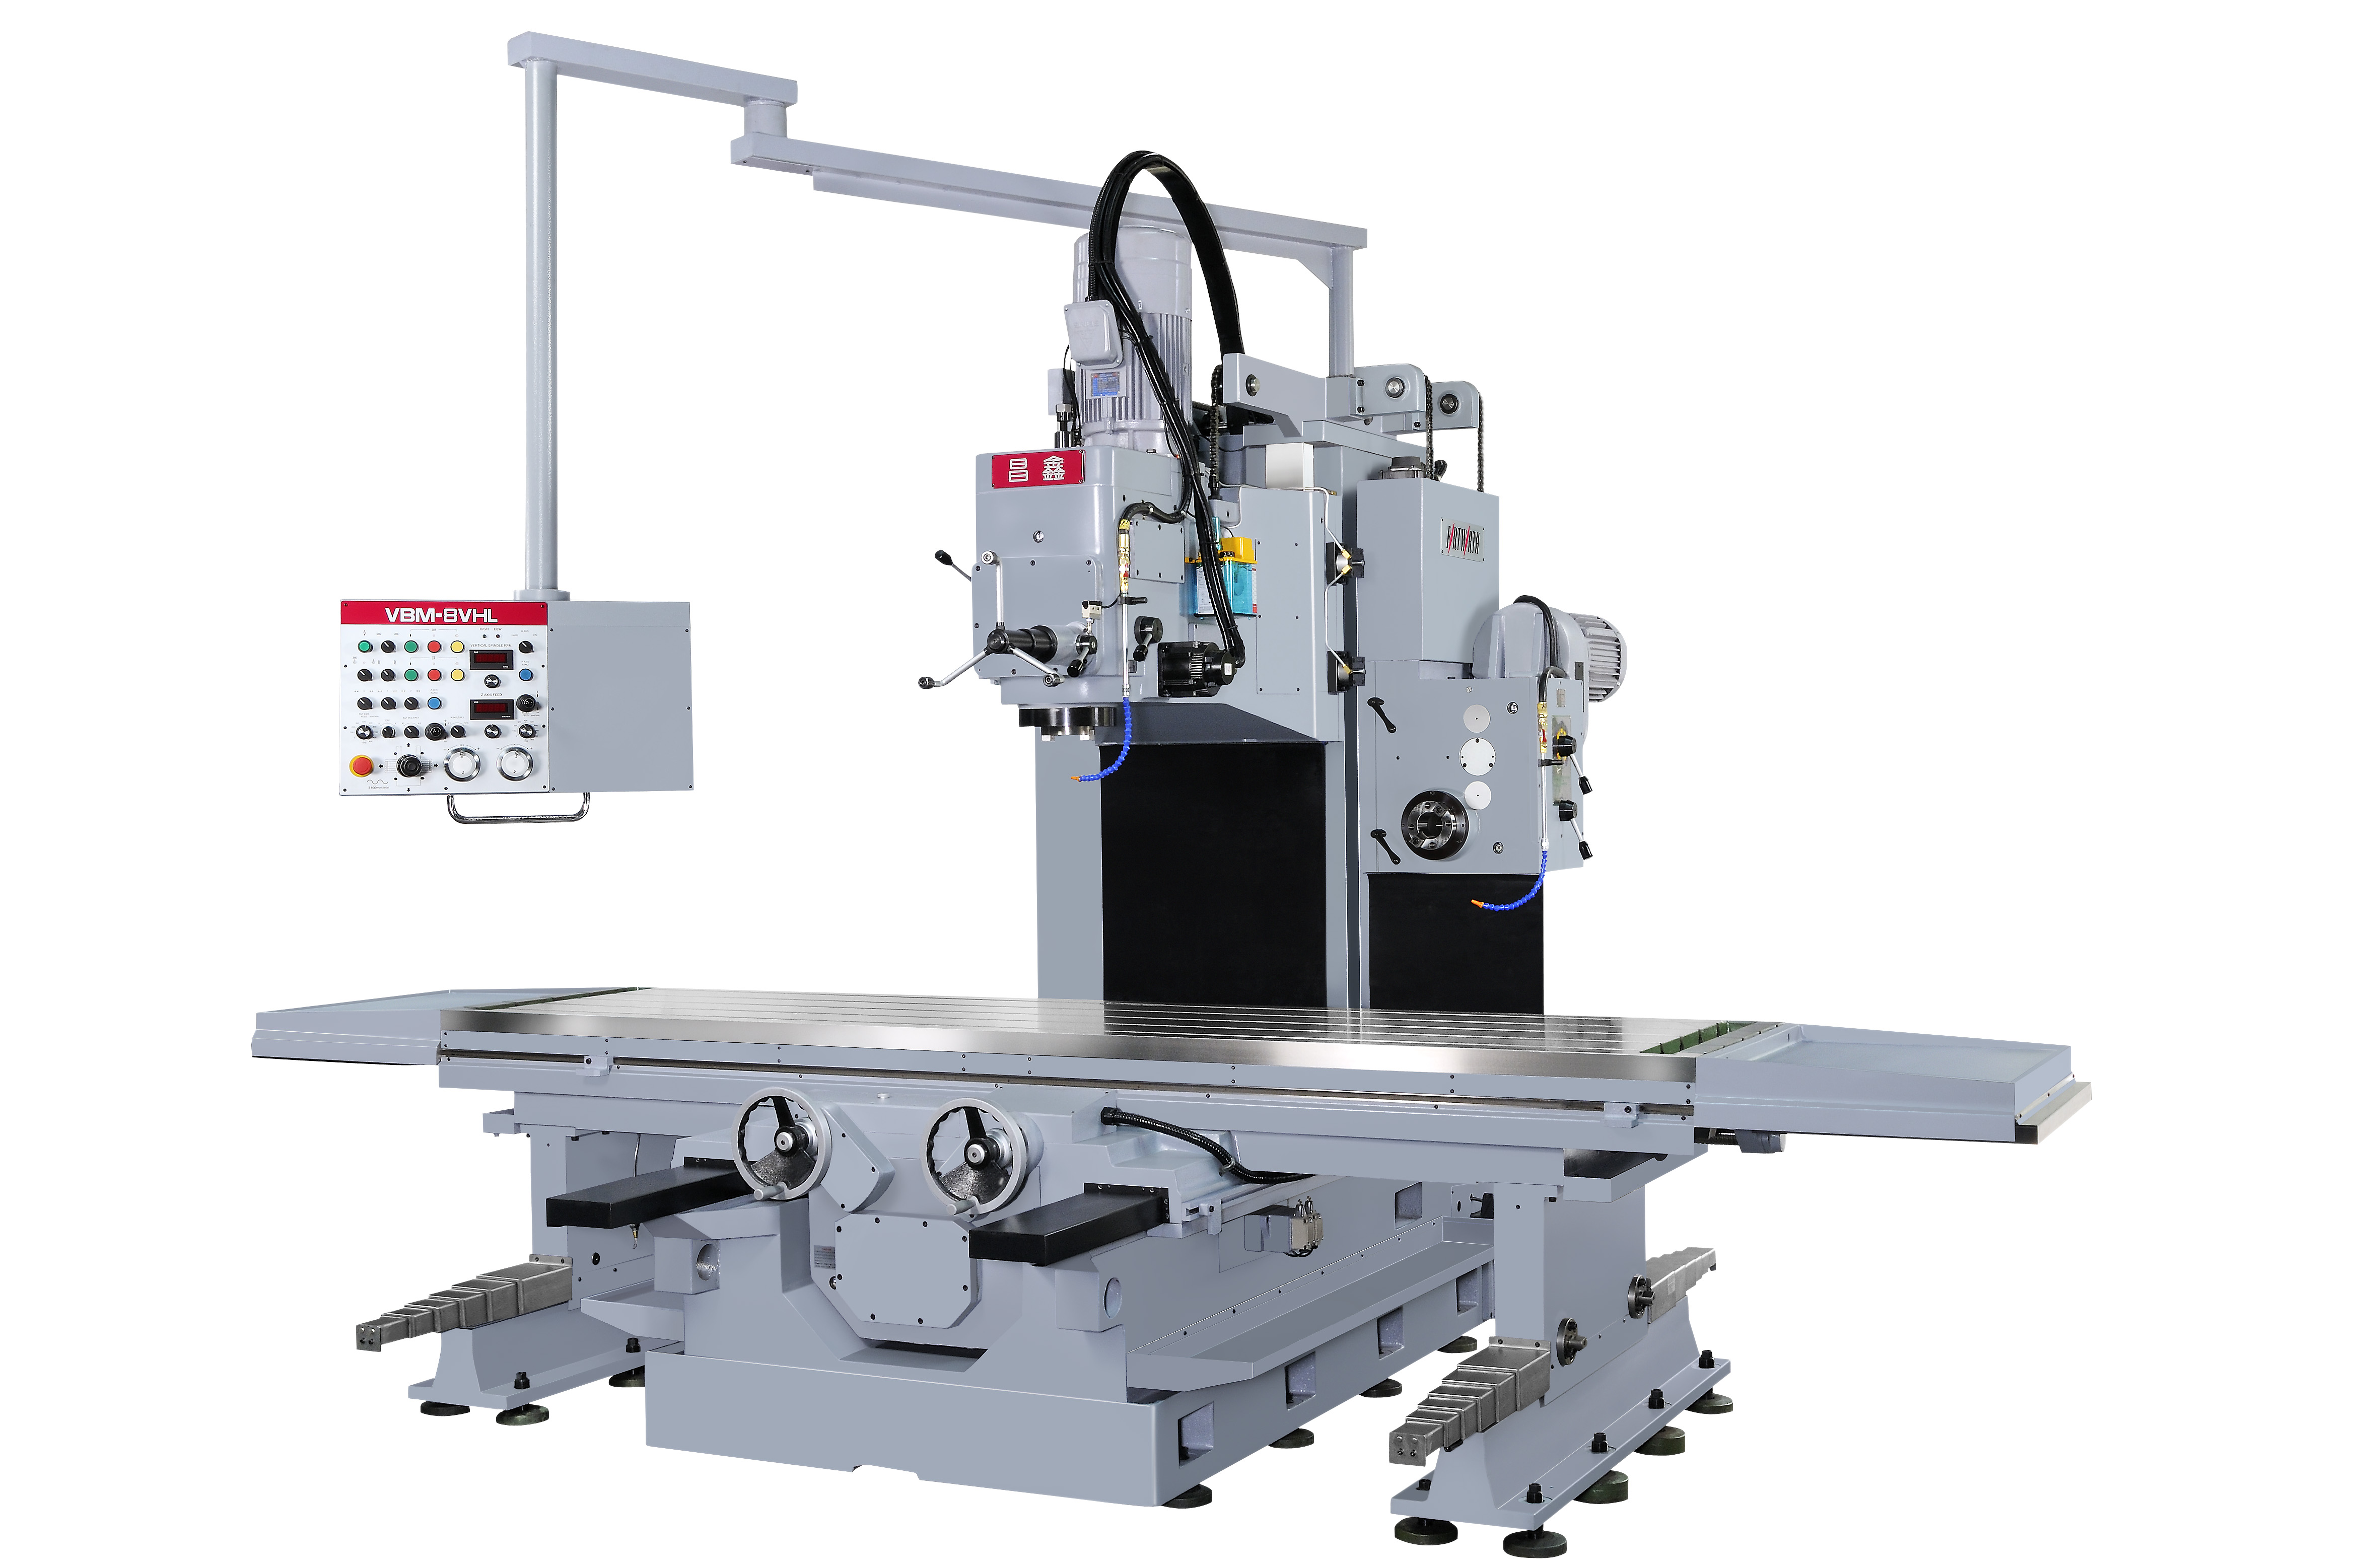 Products|BED TYPE VERTICAL WITH HORZONTAL BORING  & MILLING MACHINE Model: CS-VBM-8VHLL